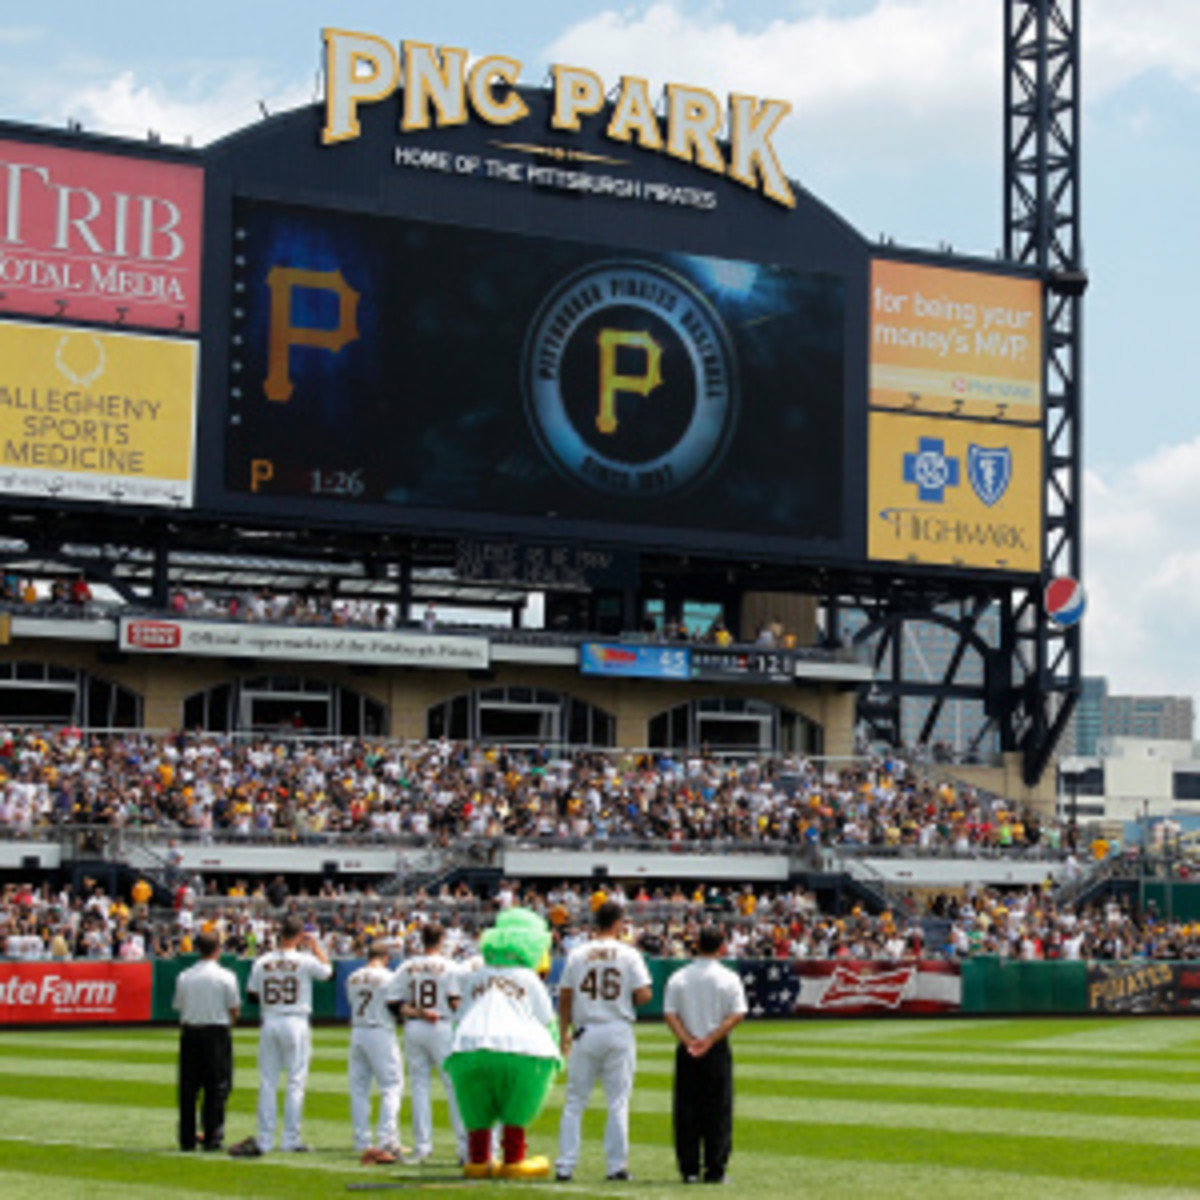 The Pittsburgh Pirates will get a logo change for 2014, but the gold "P" will remain. (Joe Robbins/Getty Images)